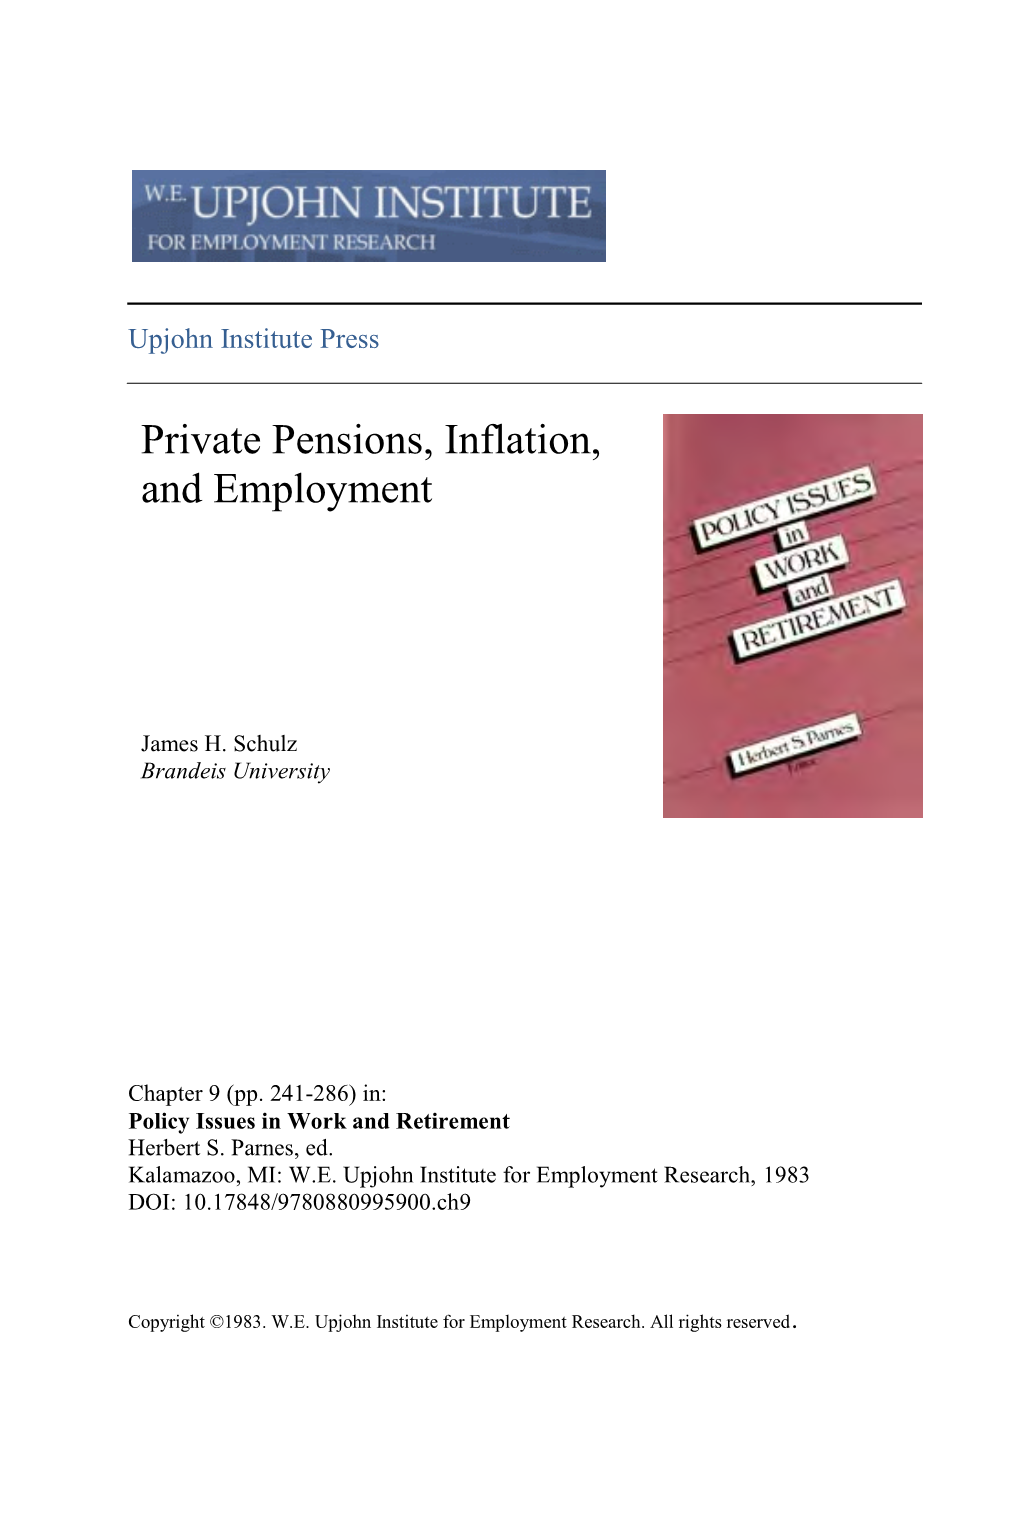 Private Pension, Inflation, and Employment